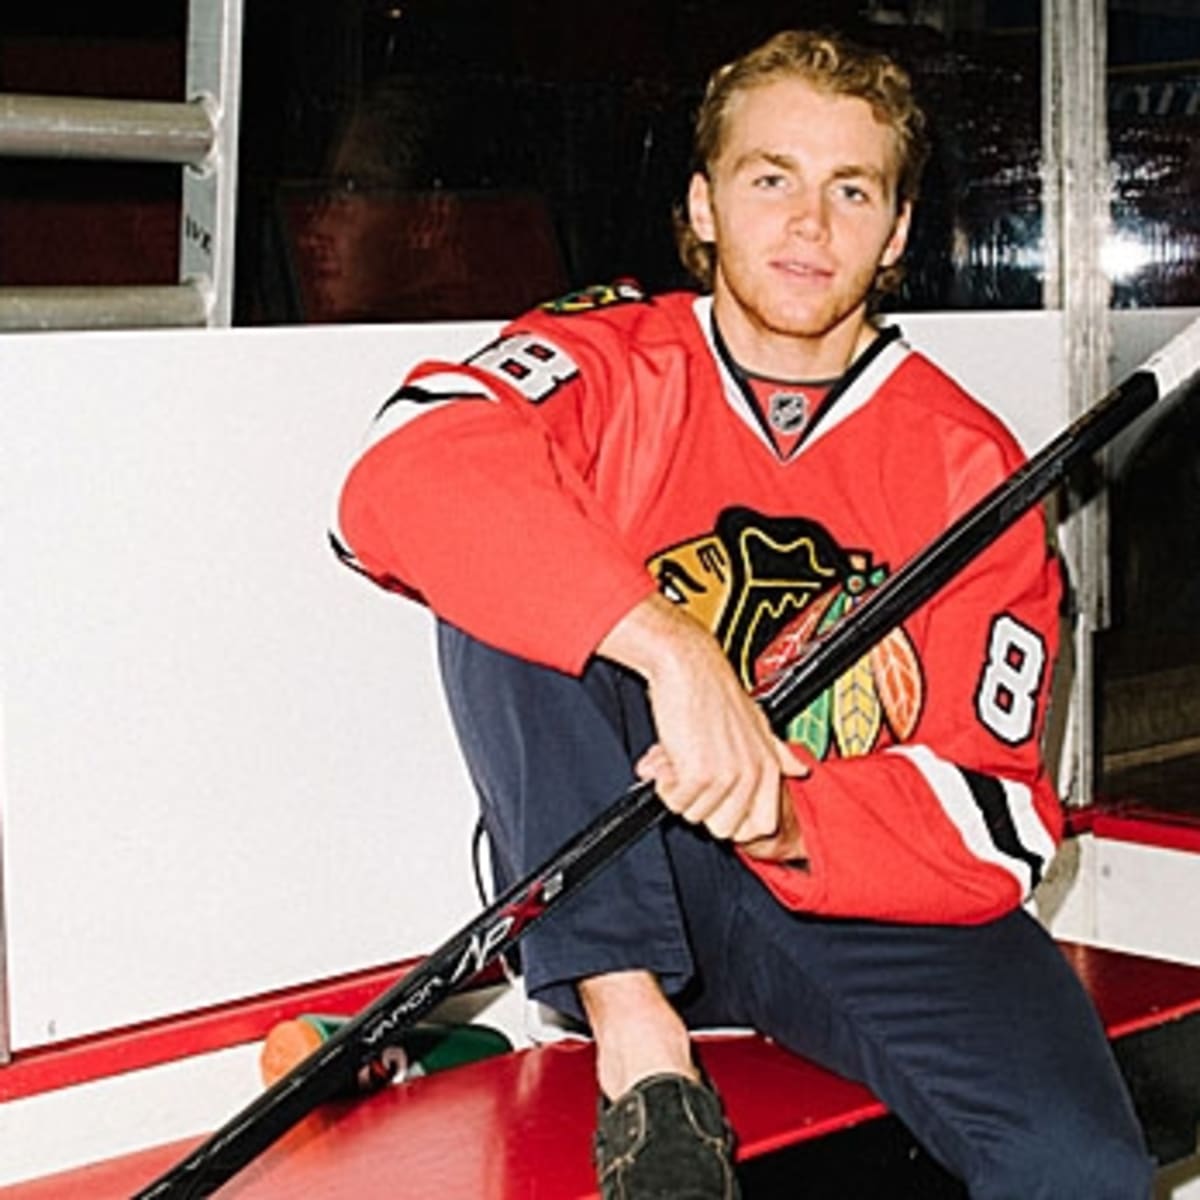 Opinion: Patrick Kane Is The Best American Player Of All-Time